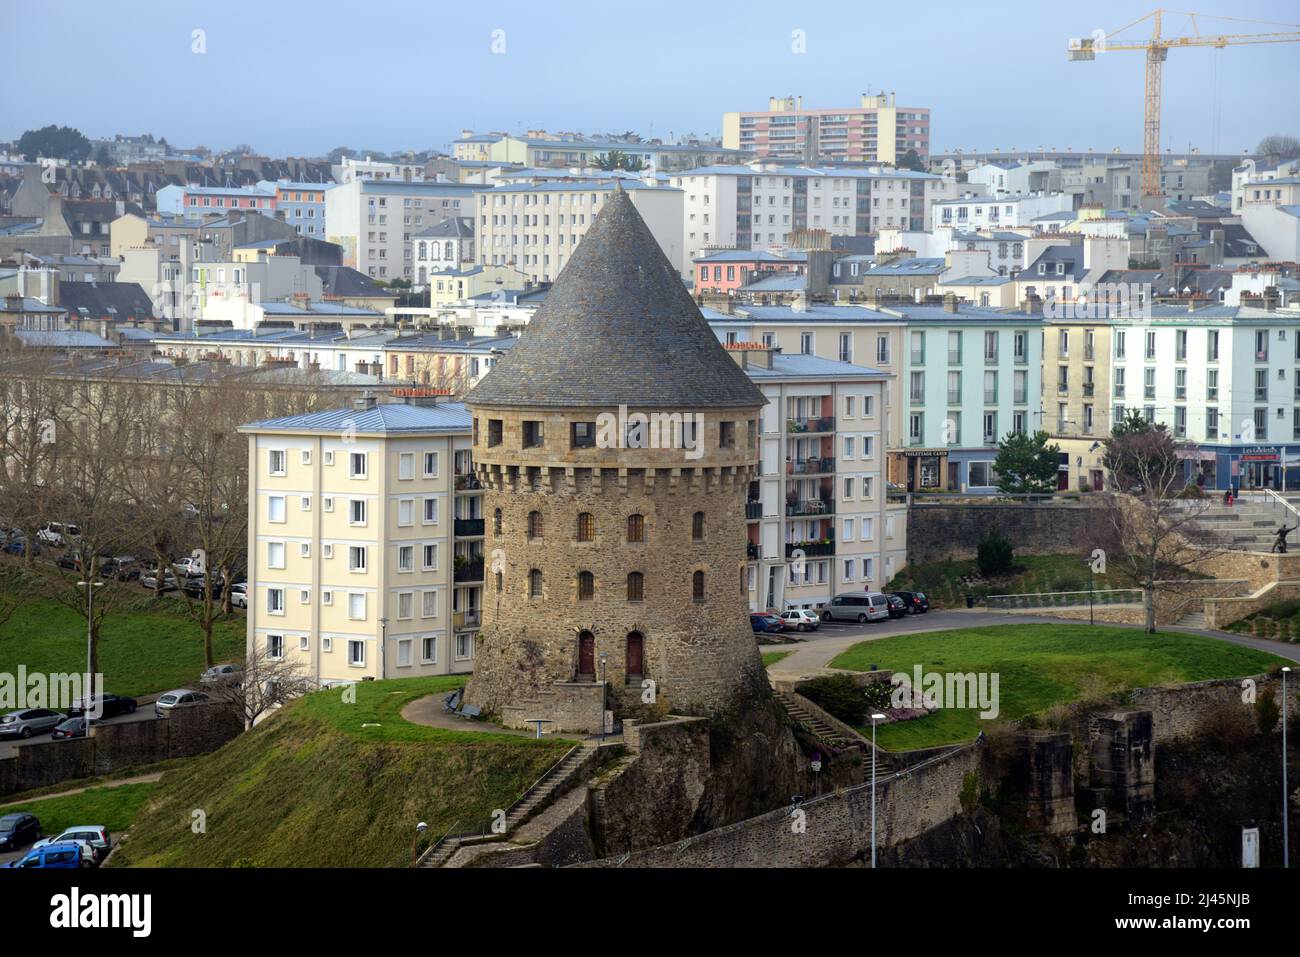 Townscape, Cityscape or View over the Medieval Tower, Tour Tanguy or Tanguy Tower & Modernist Buildings & Skyline in Brest Brittany France Stock Photo